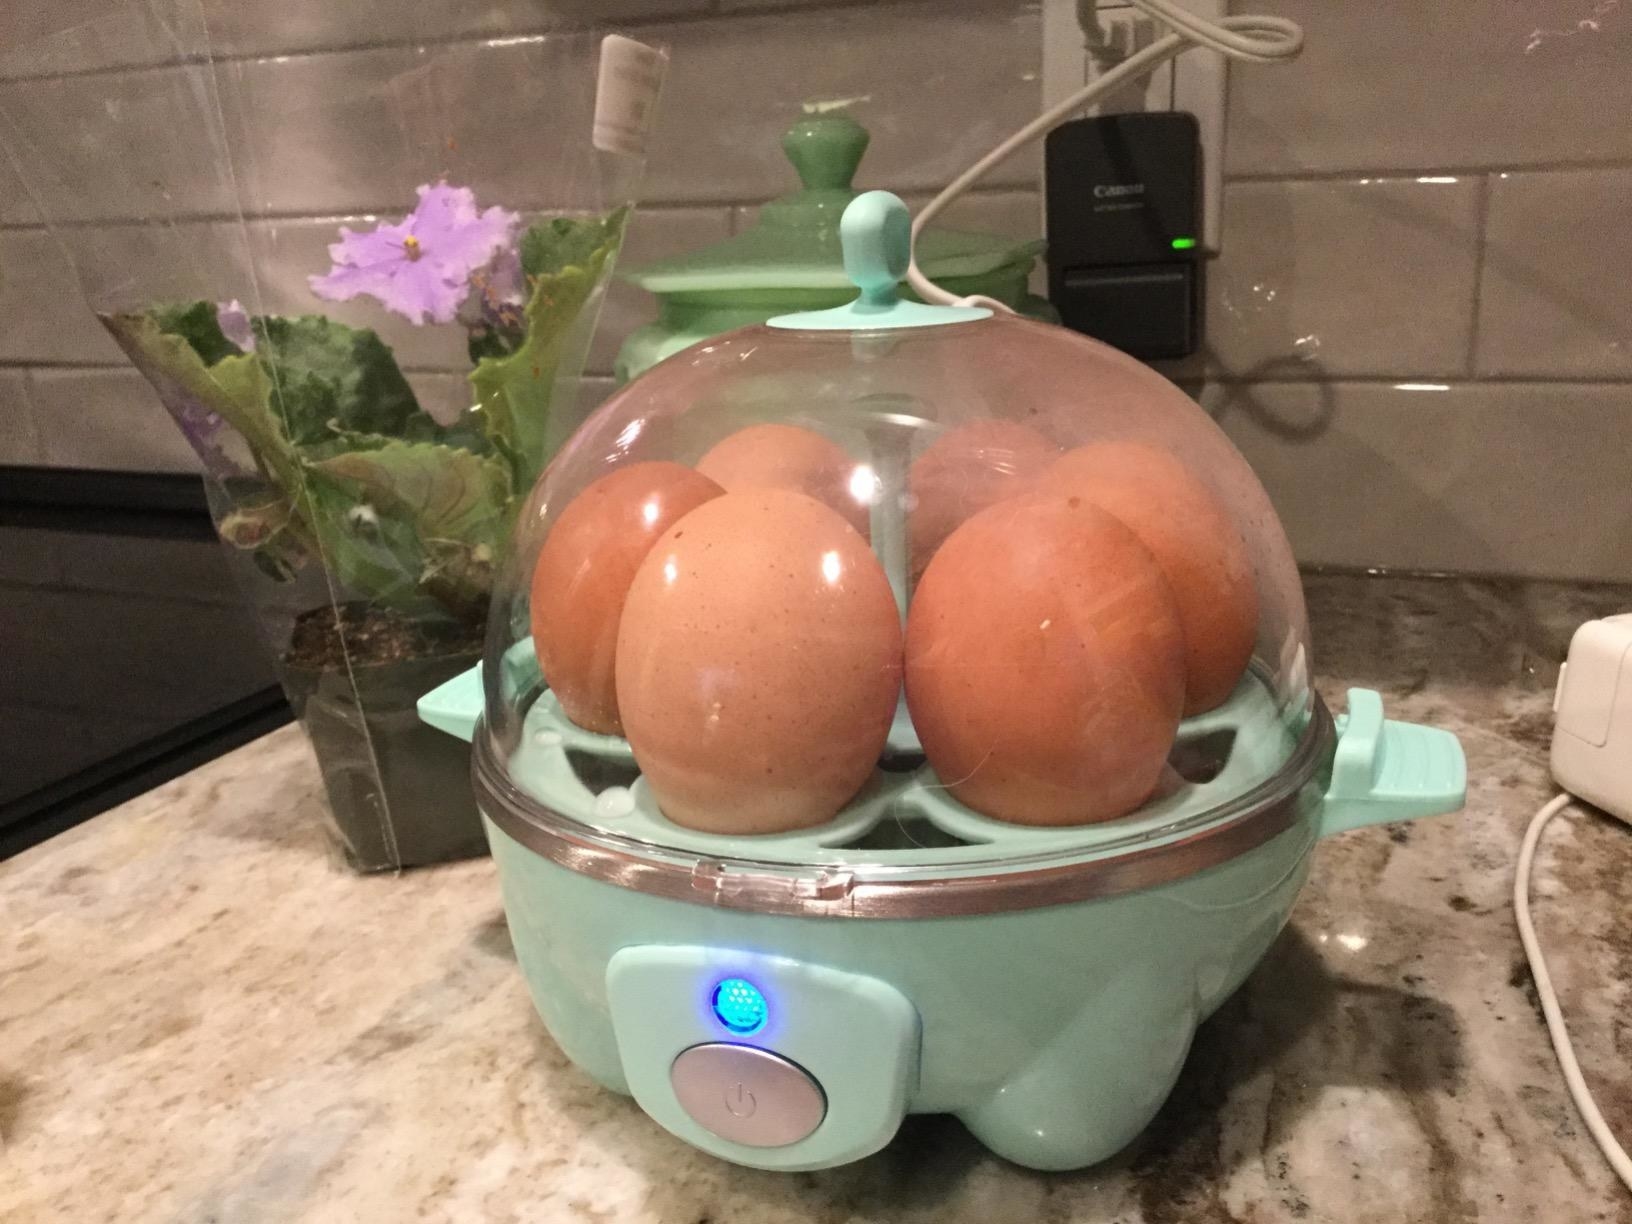 The product in teal, making eggs